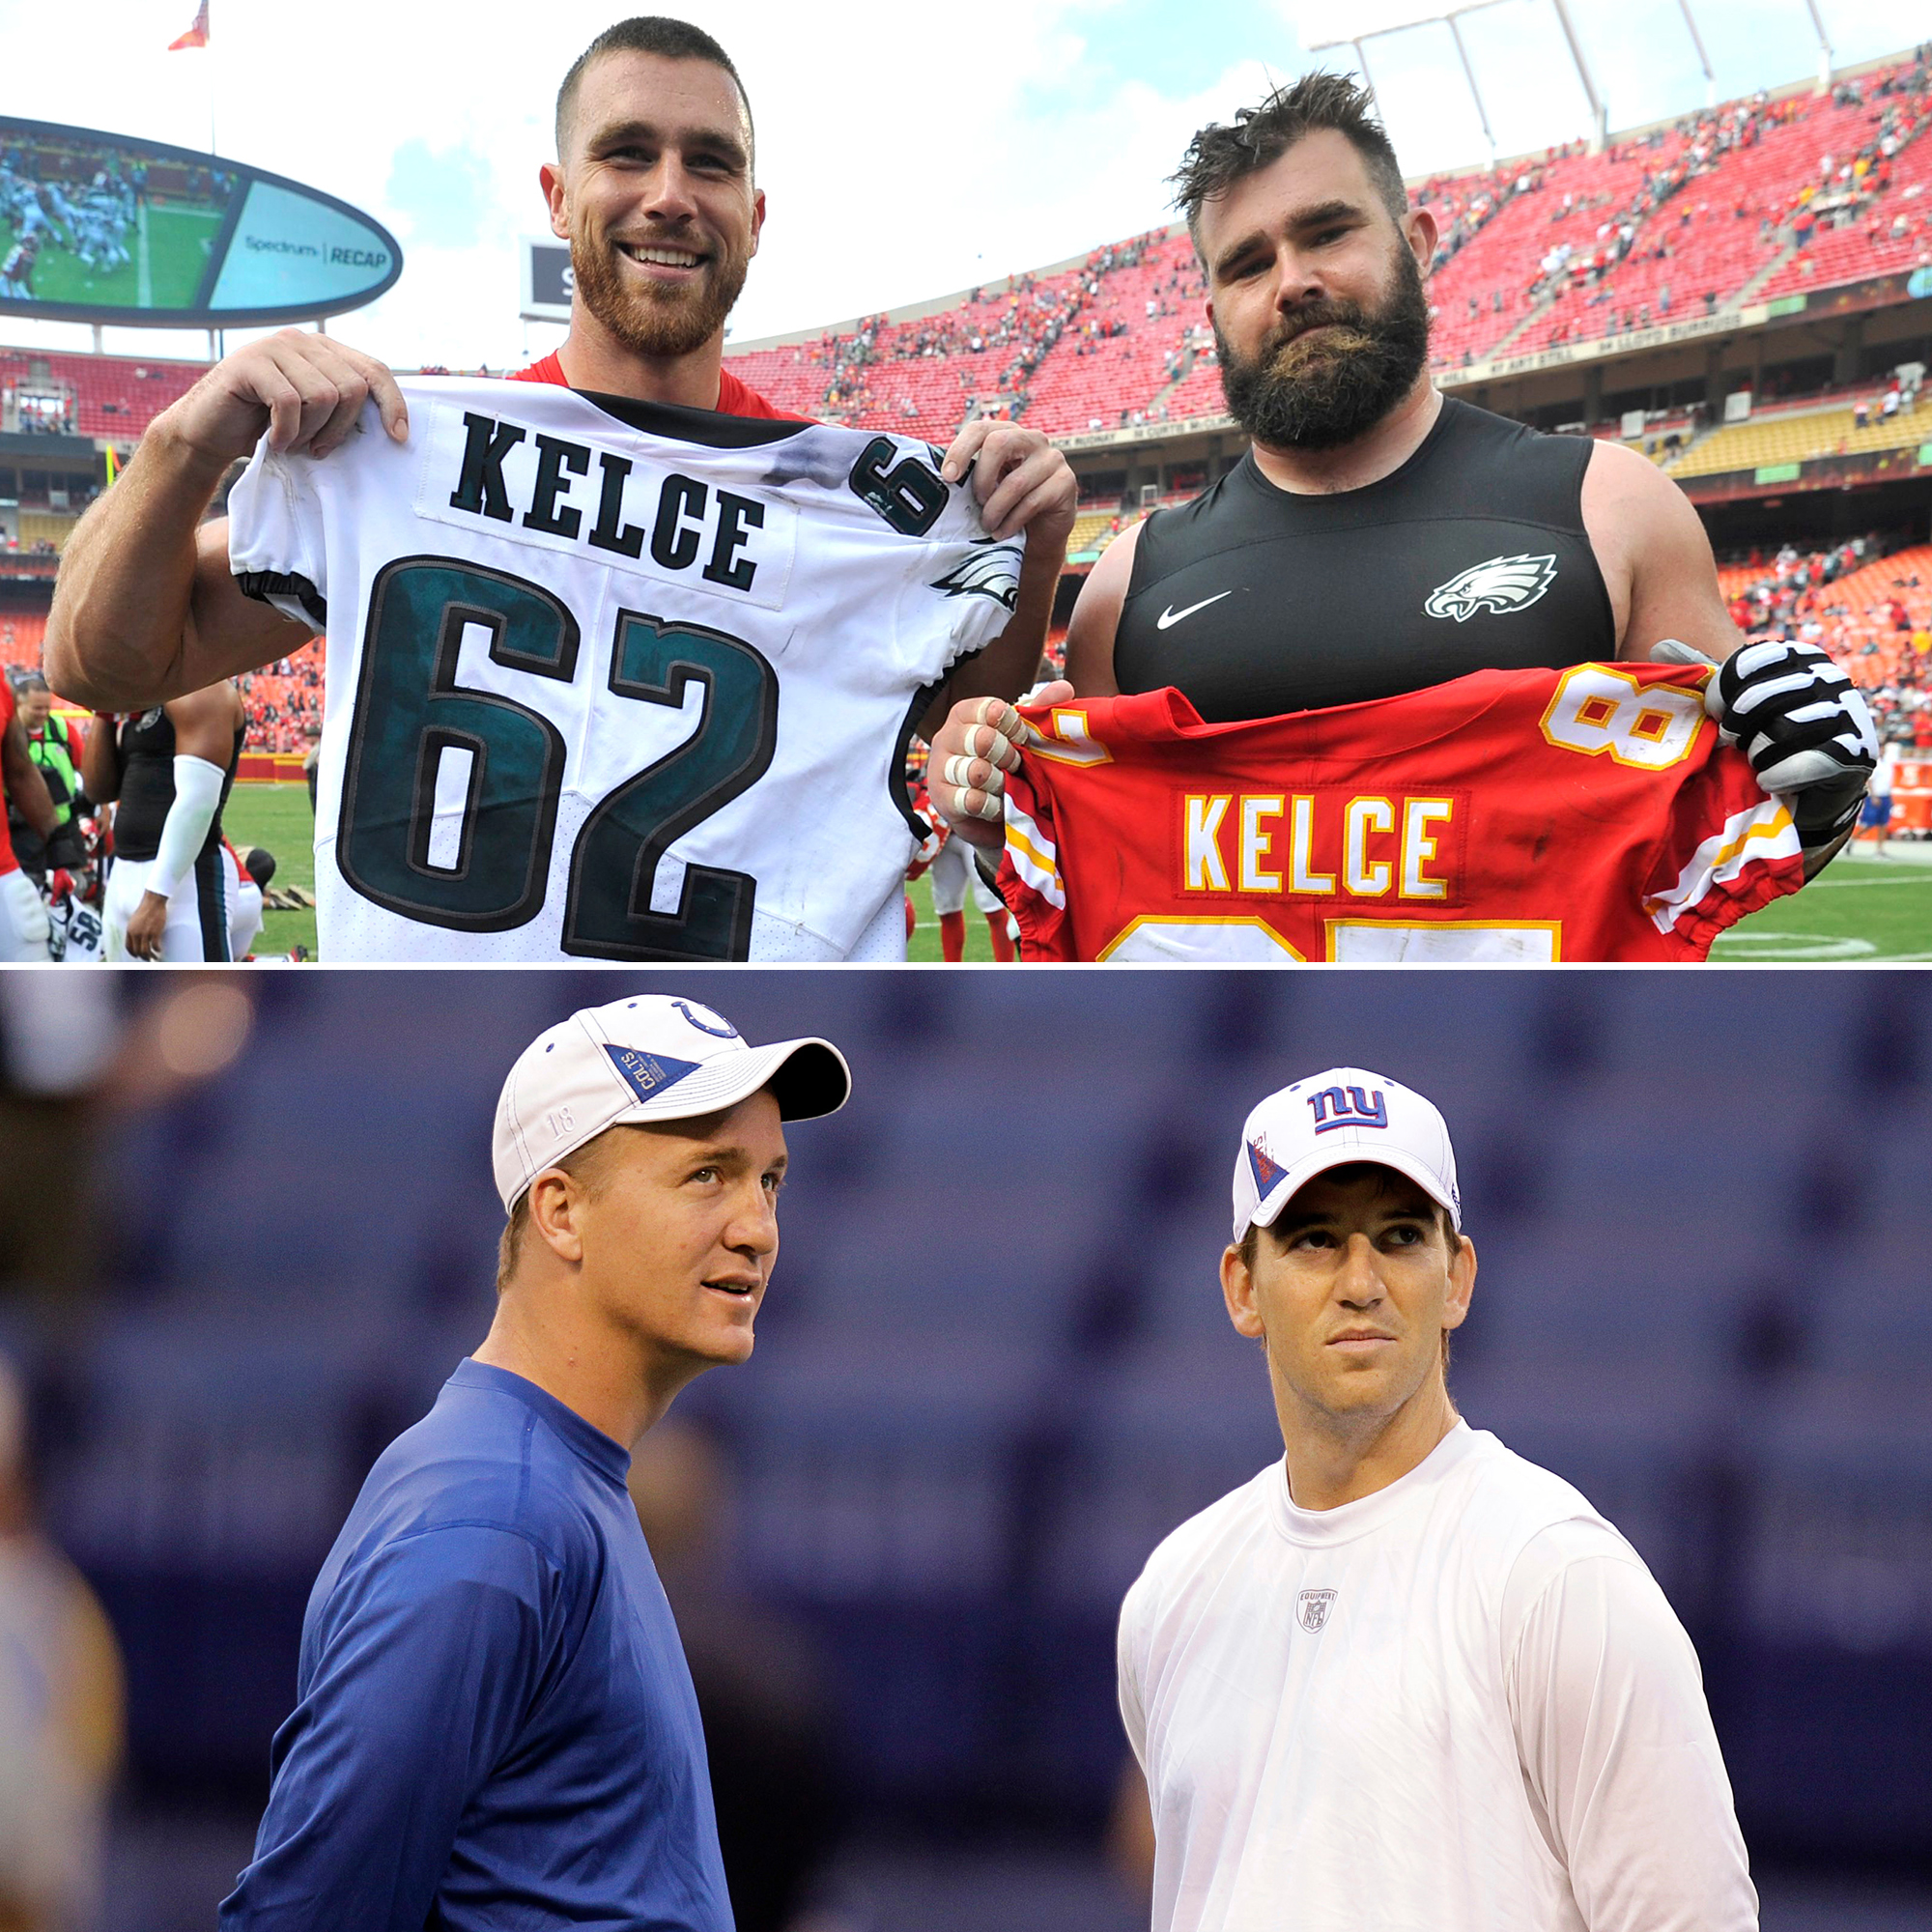 Kelce tops big brother on Super Bowl stage